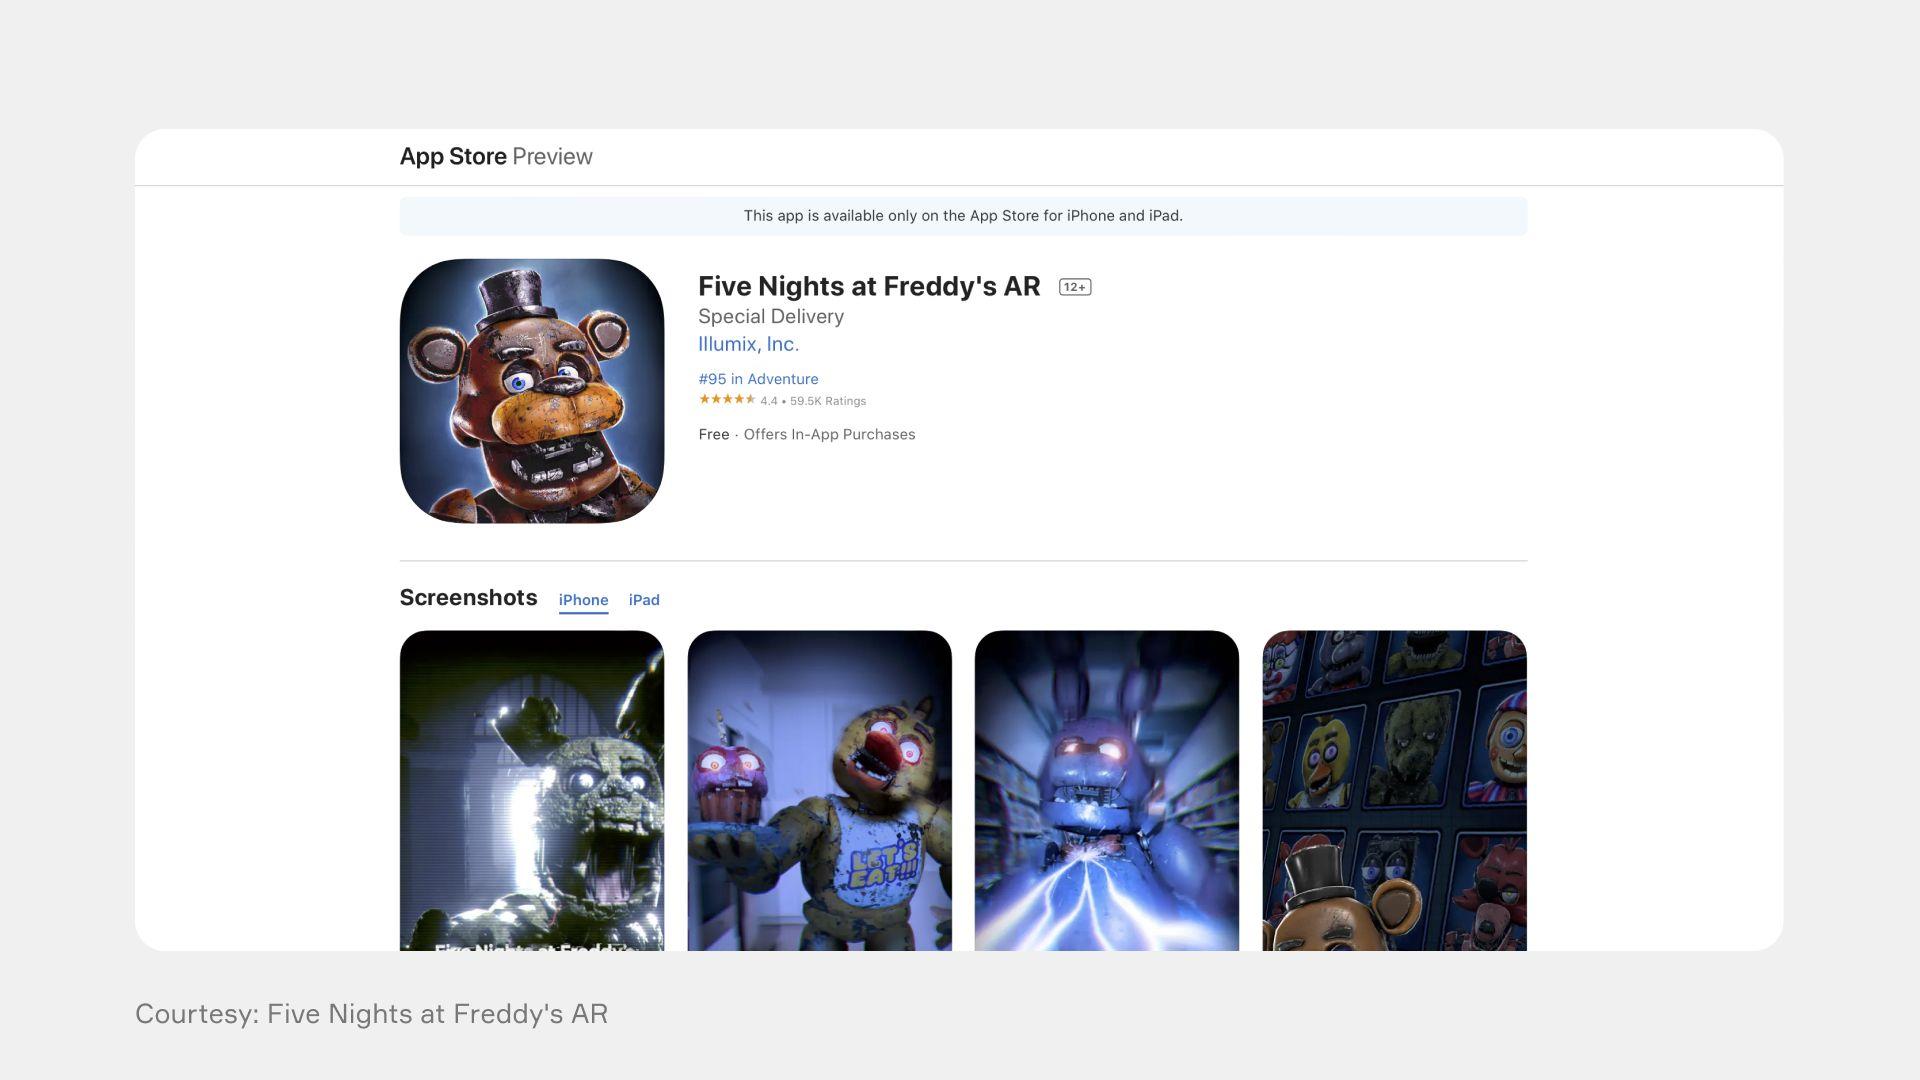 Play Five Nights at Freddy's AR Online for Free on PC & Mobile